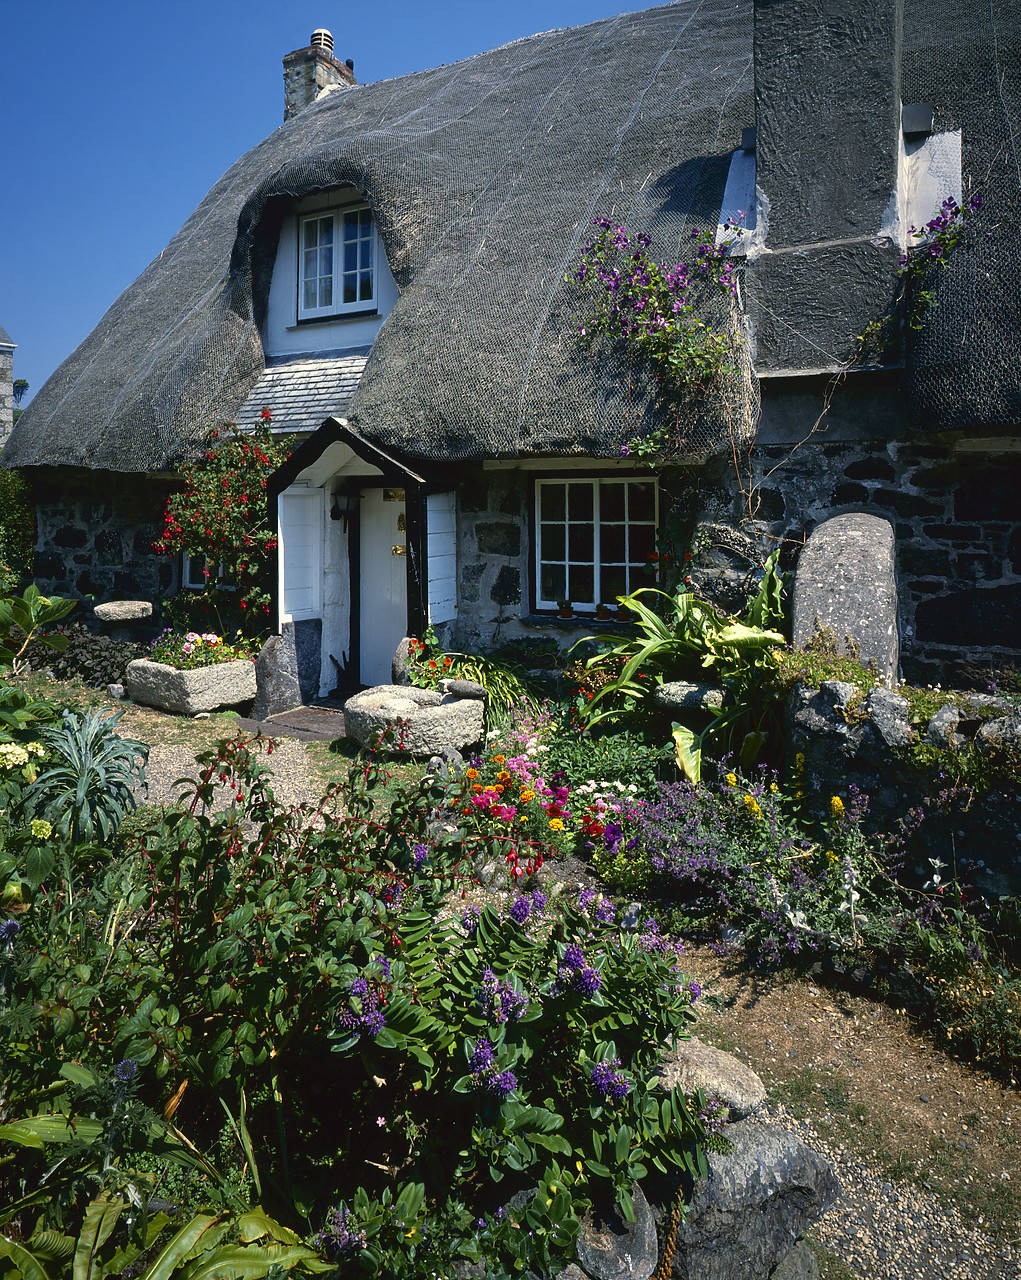 #892303-1 - Thatched Cottage & Garden, Cadgwith, Cornwall, England